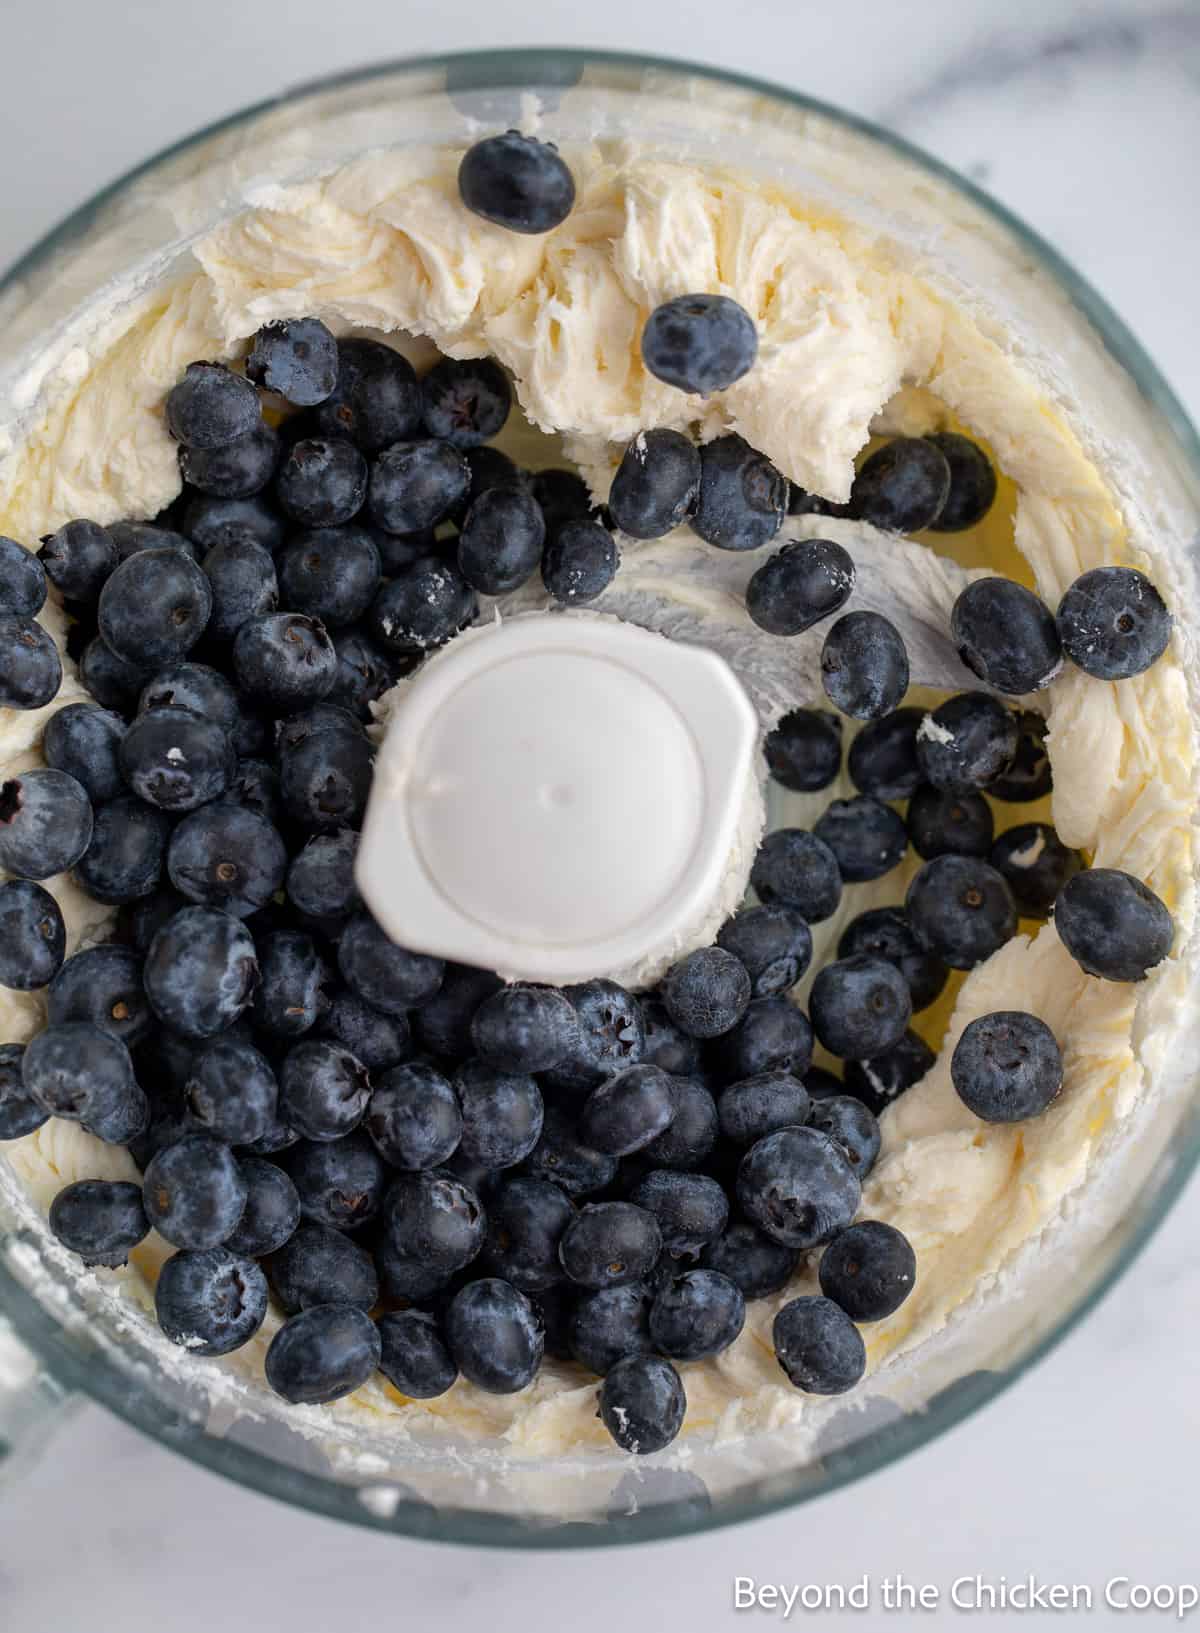 Blueberries added to a food processor filled with cream cheese.